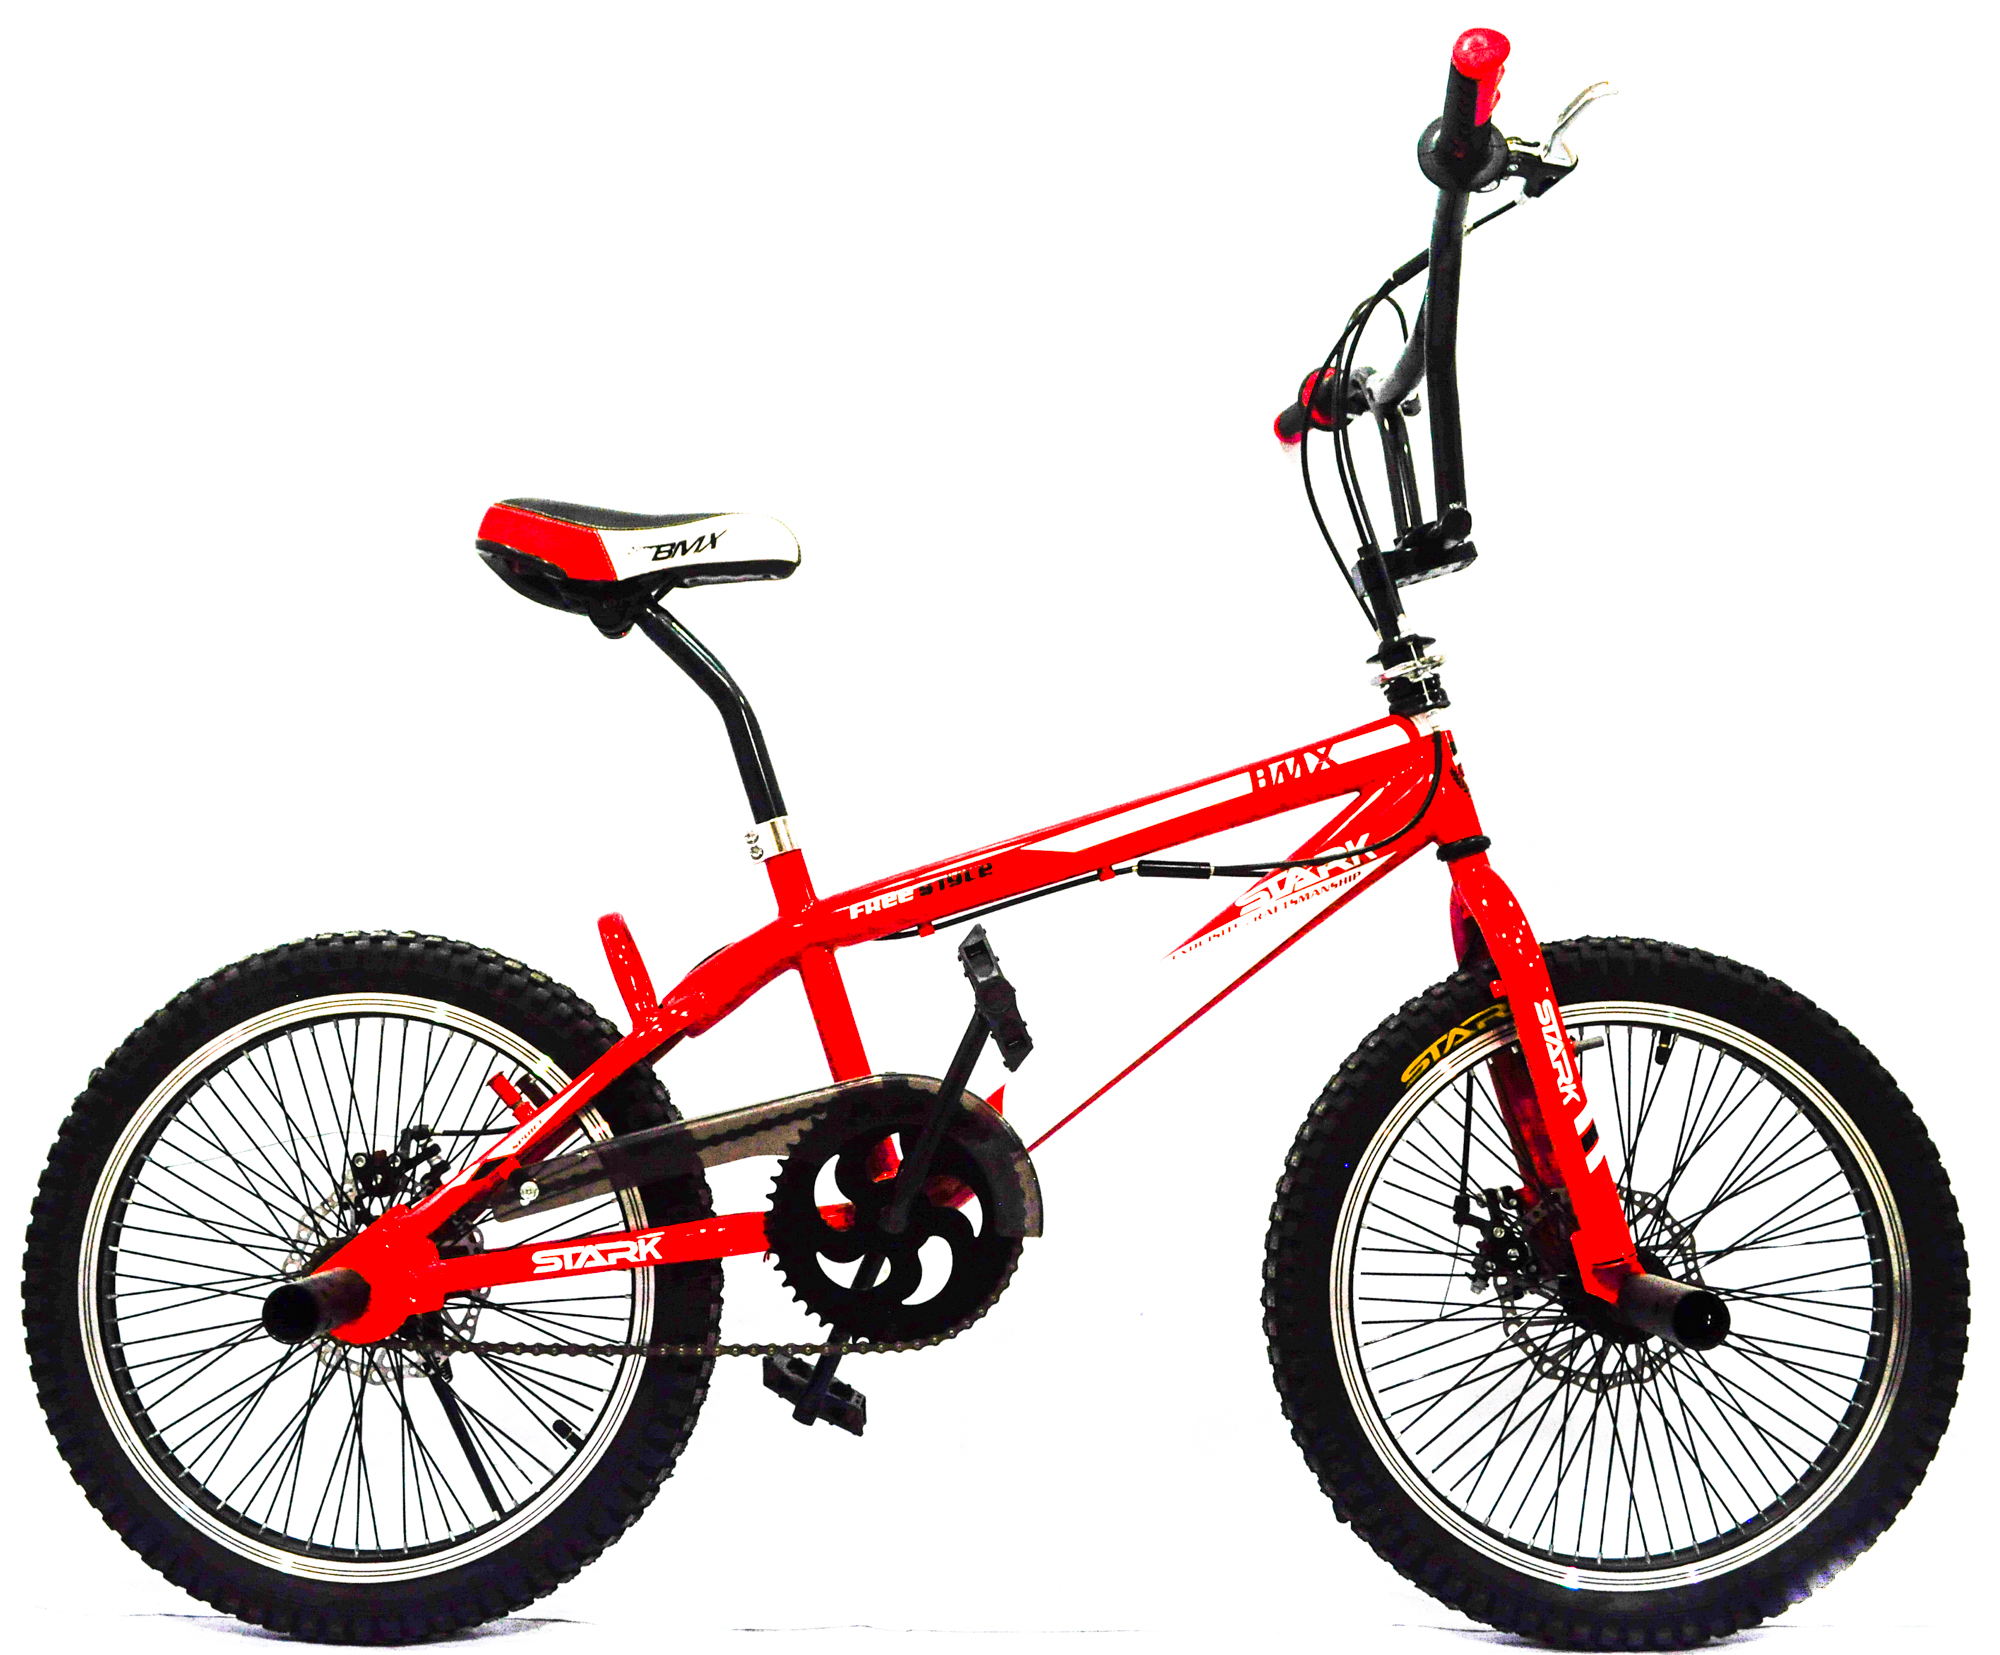 2nd hand bmx bikes for sale